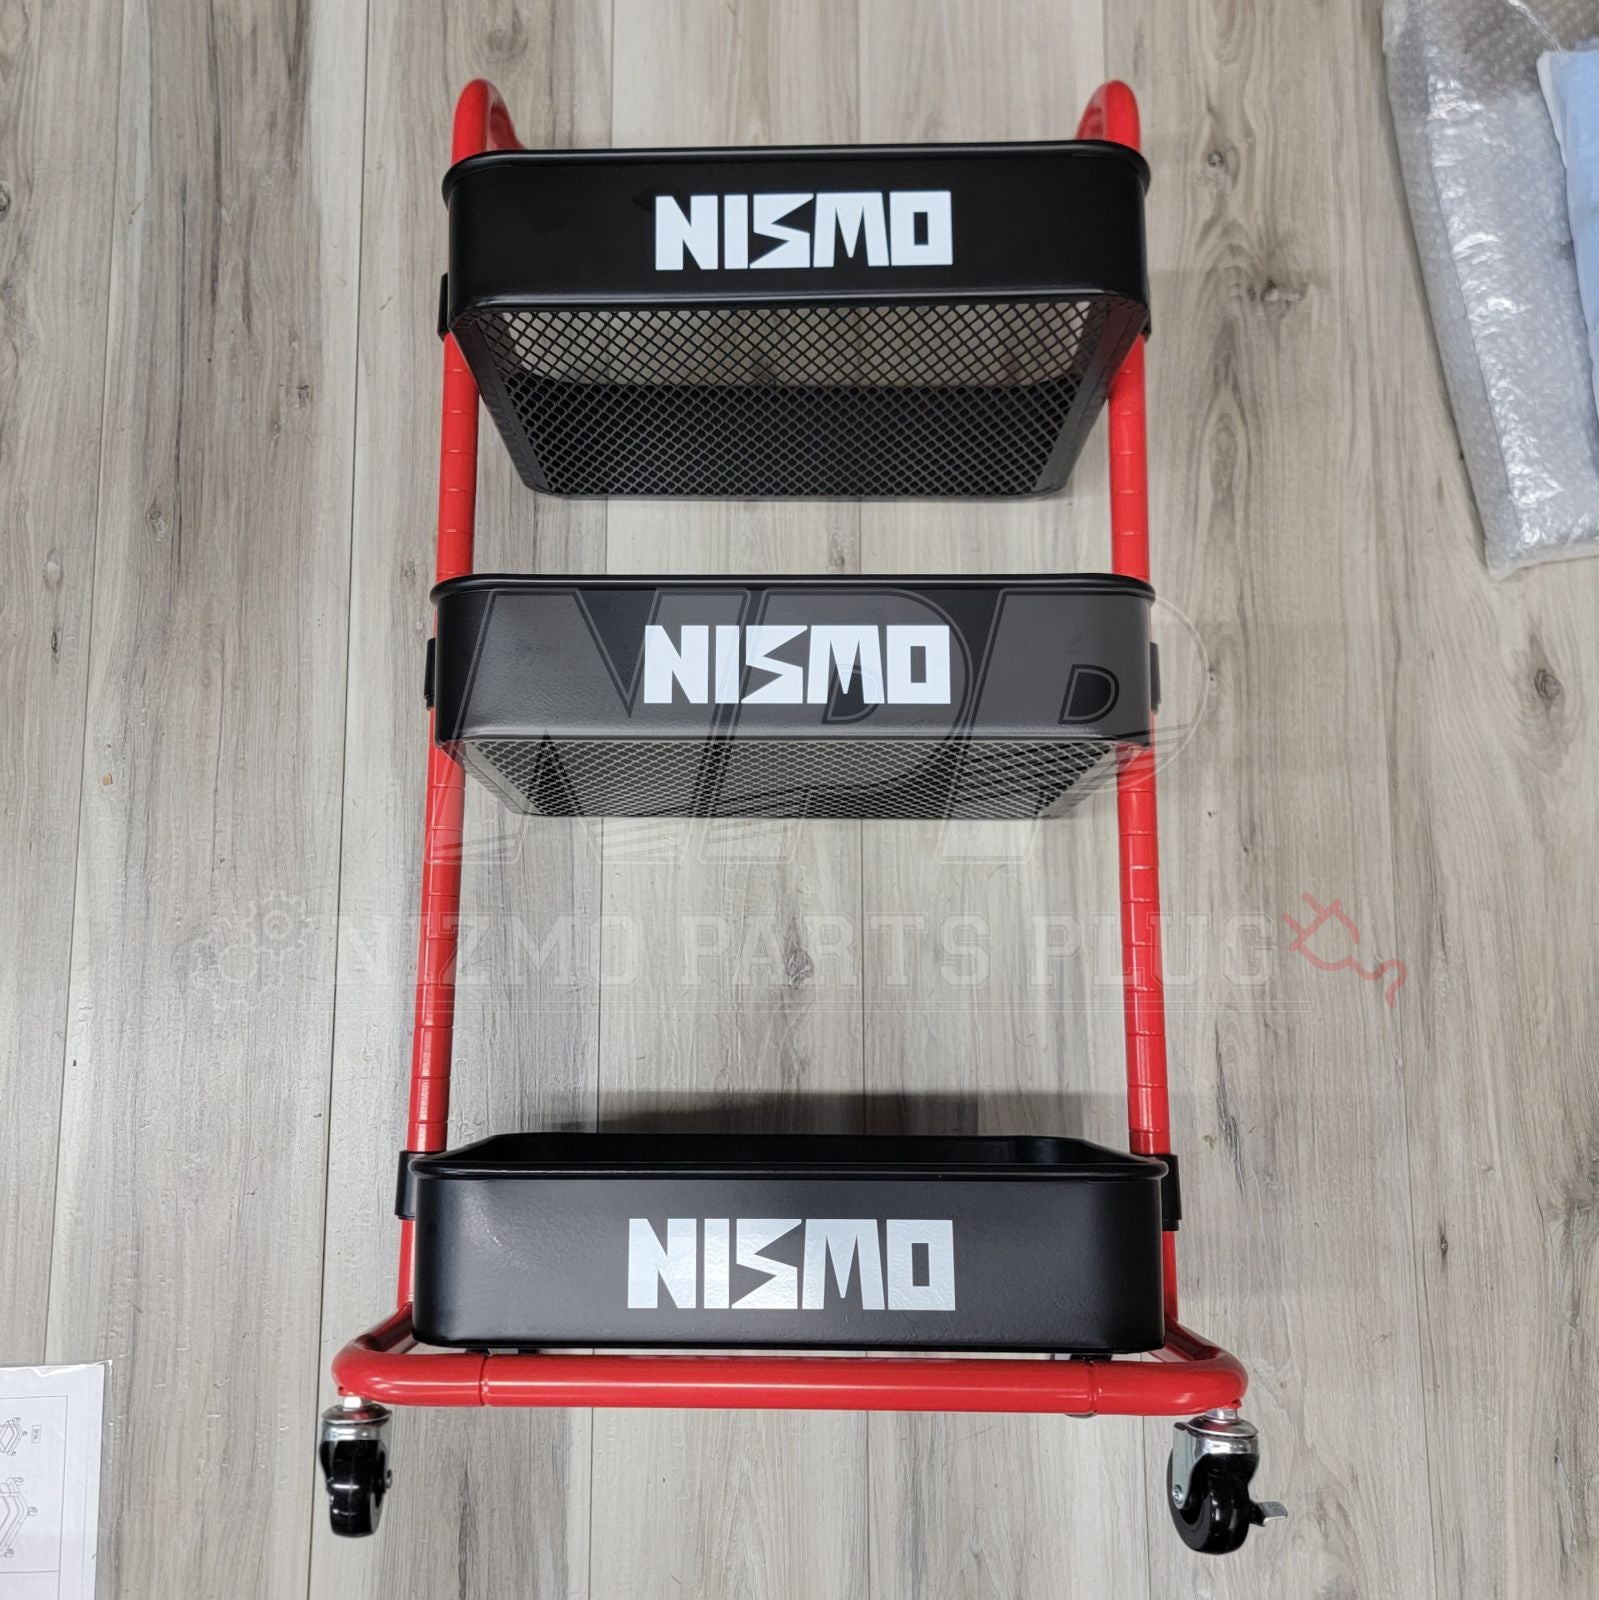 Nismo Reproduction 3 Tier Rolling Tool Cart